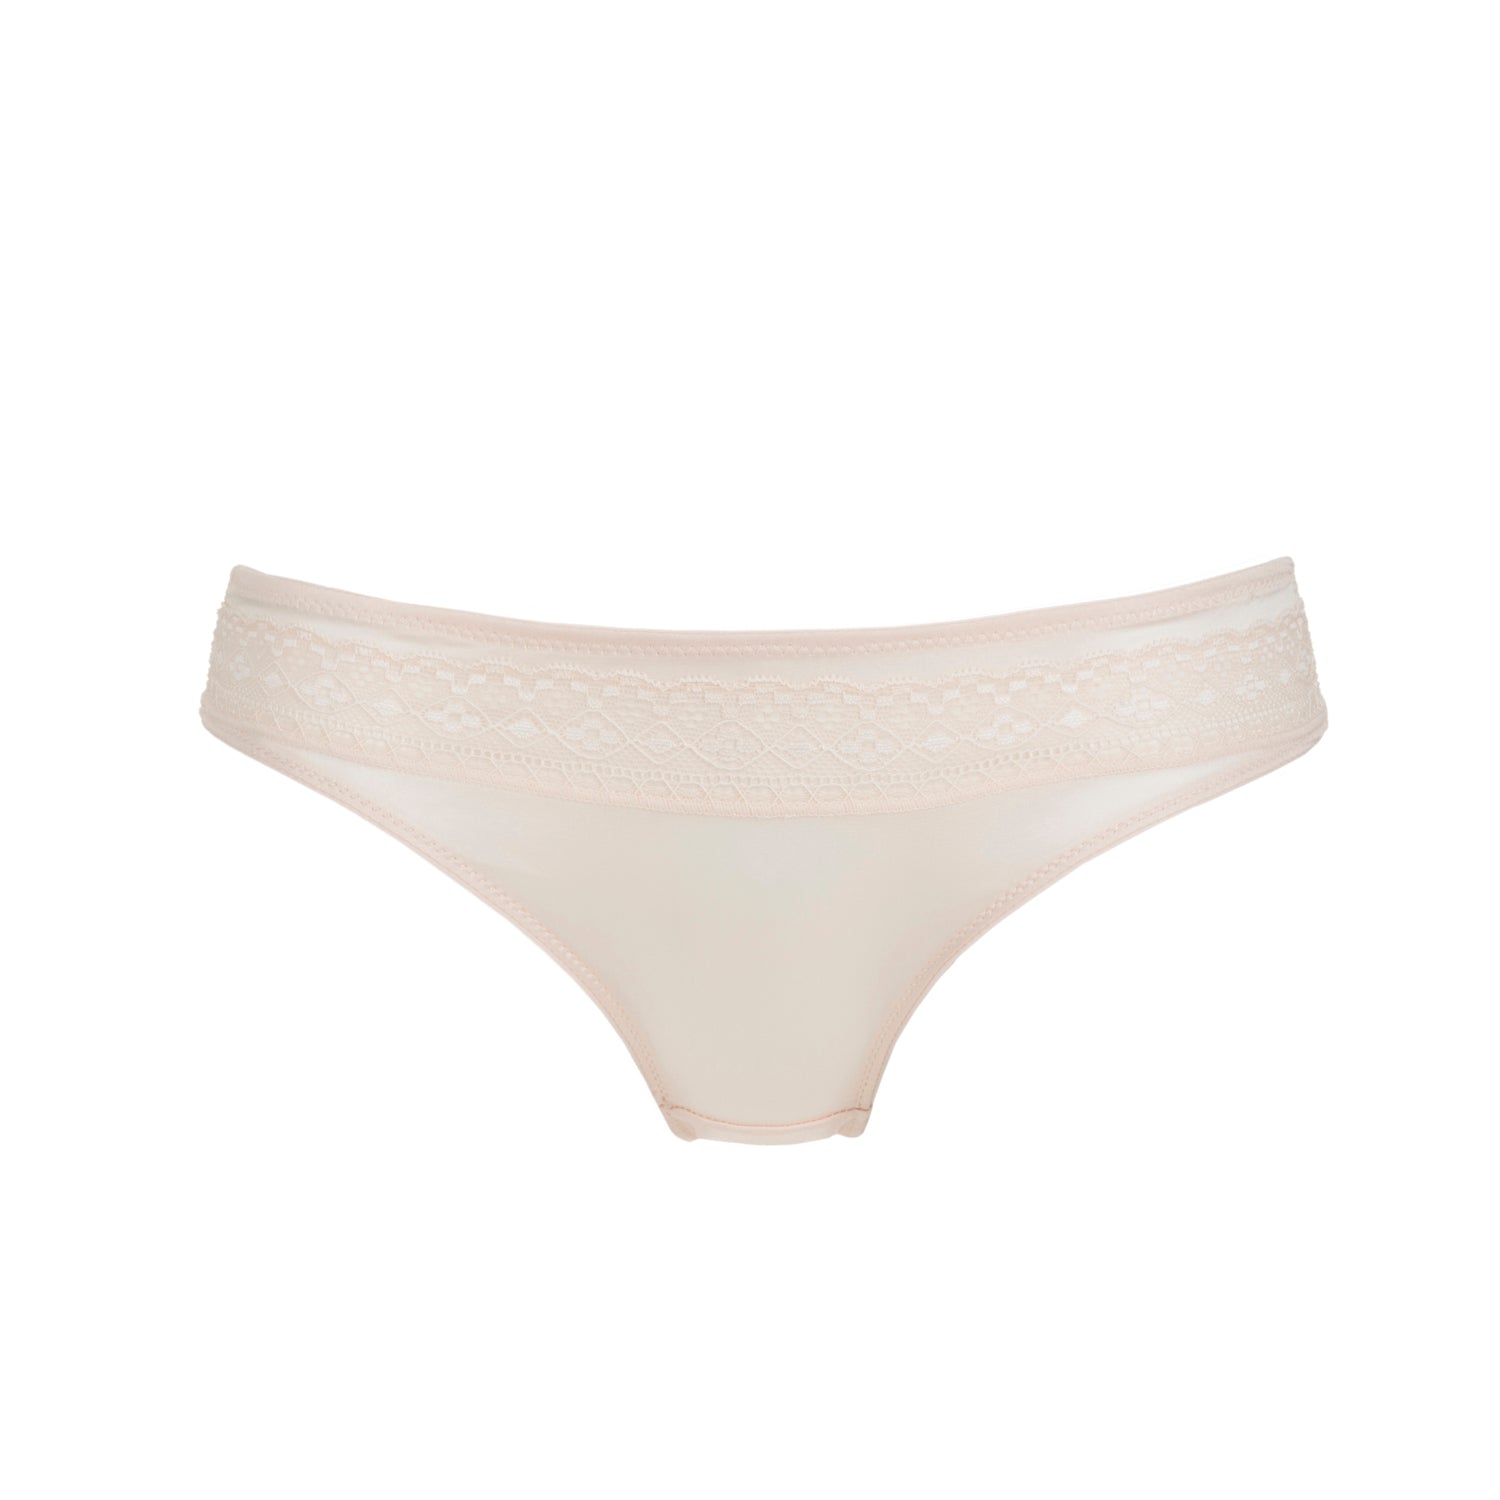 Pure Silk and Organic Cotton Lingerie- Sunbleached Brief Panty